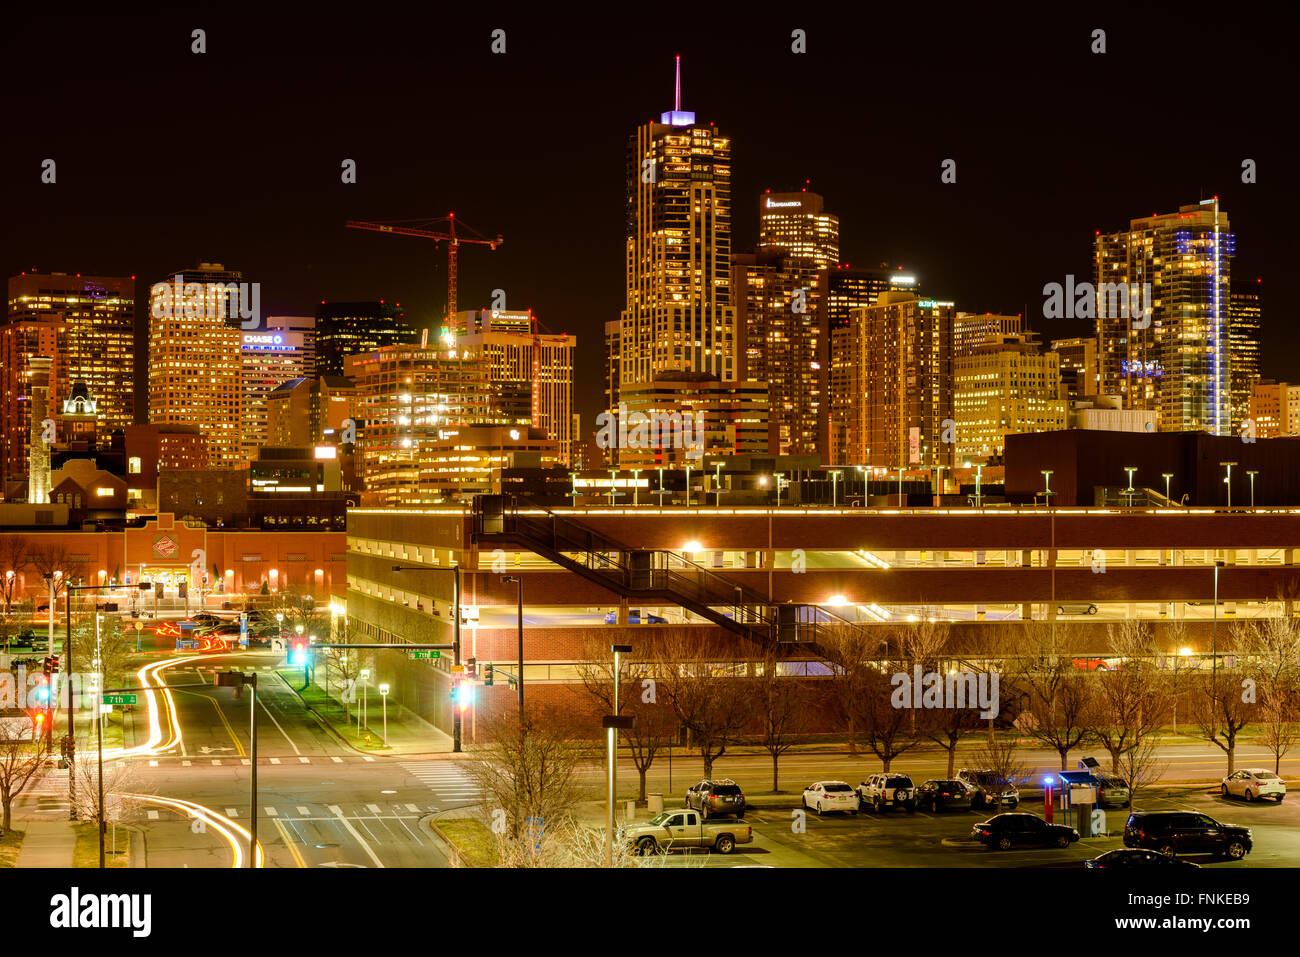 Denver, Colorado, USA - December 09, 2015: A night view of glittering skyscrapers and bright streets of Downtown Denver. Stock Photo